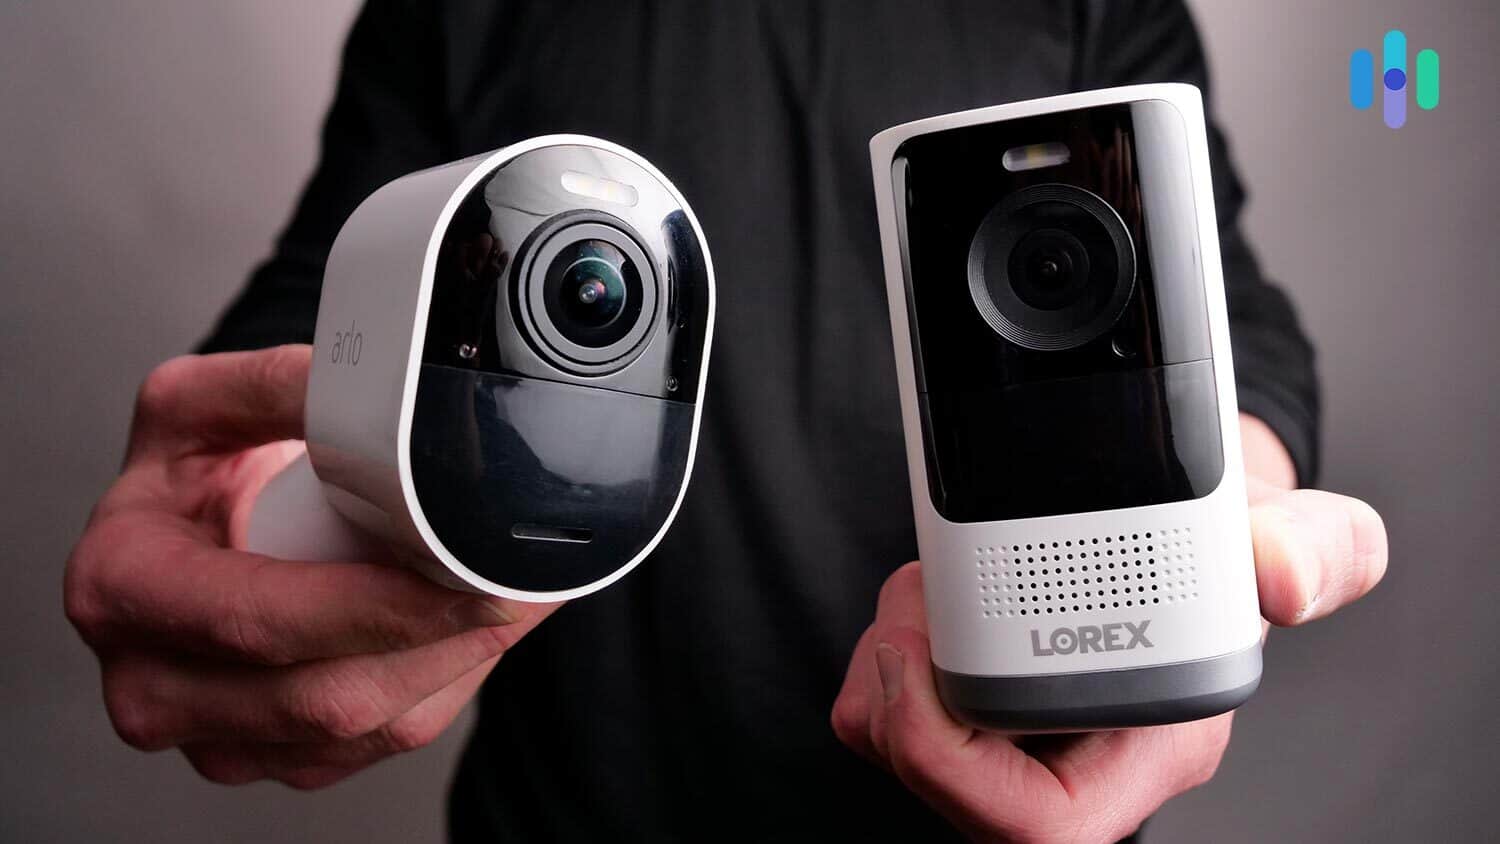 Side-by-side view of Arlo and Lorex cameras